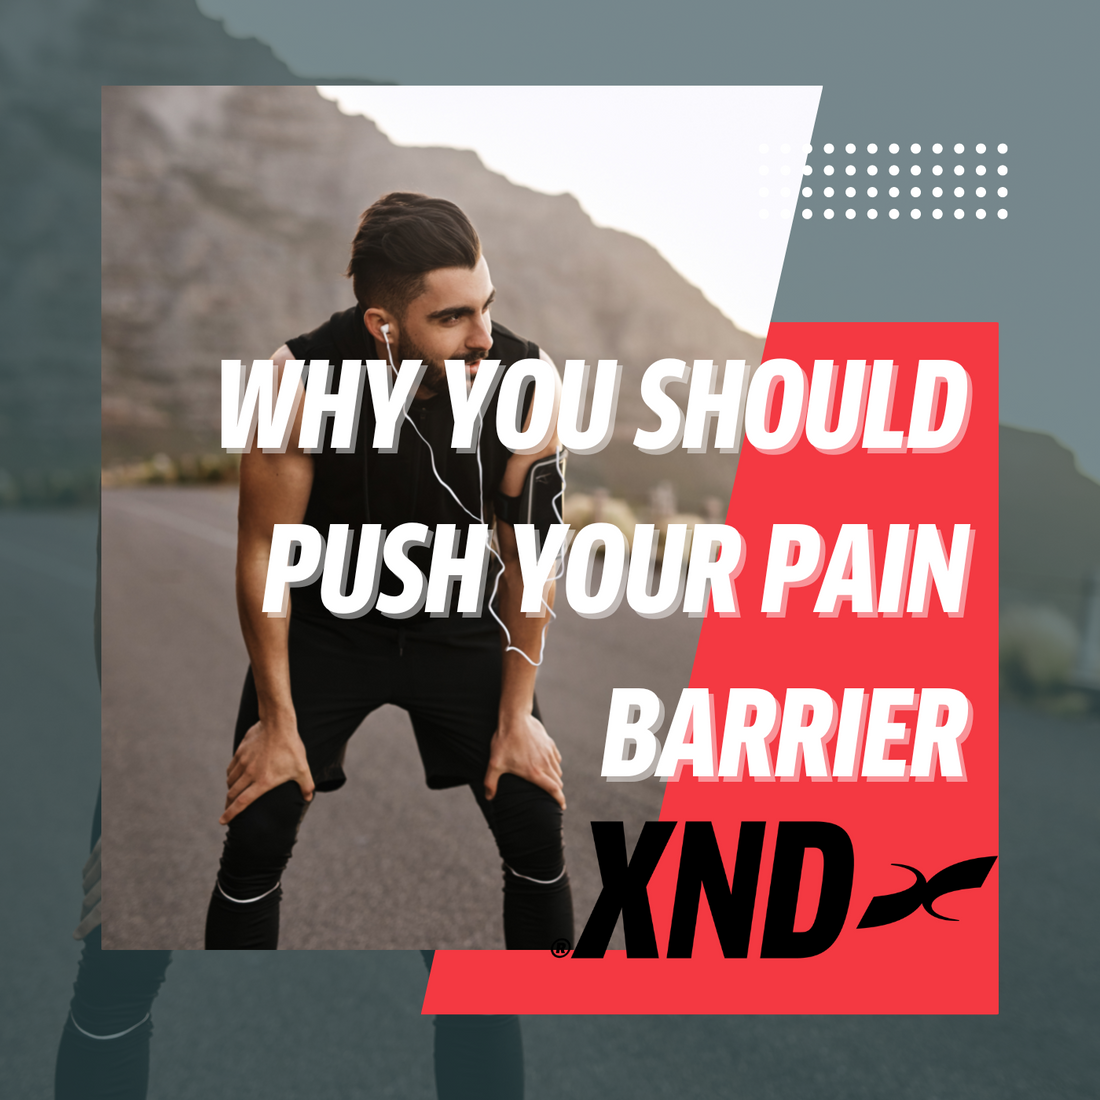 Why you should push your pain barrier